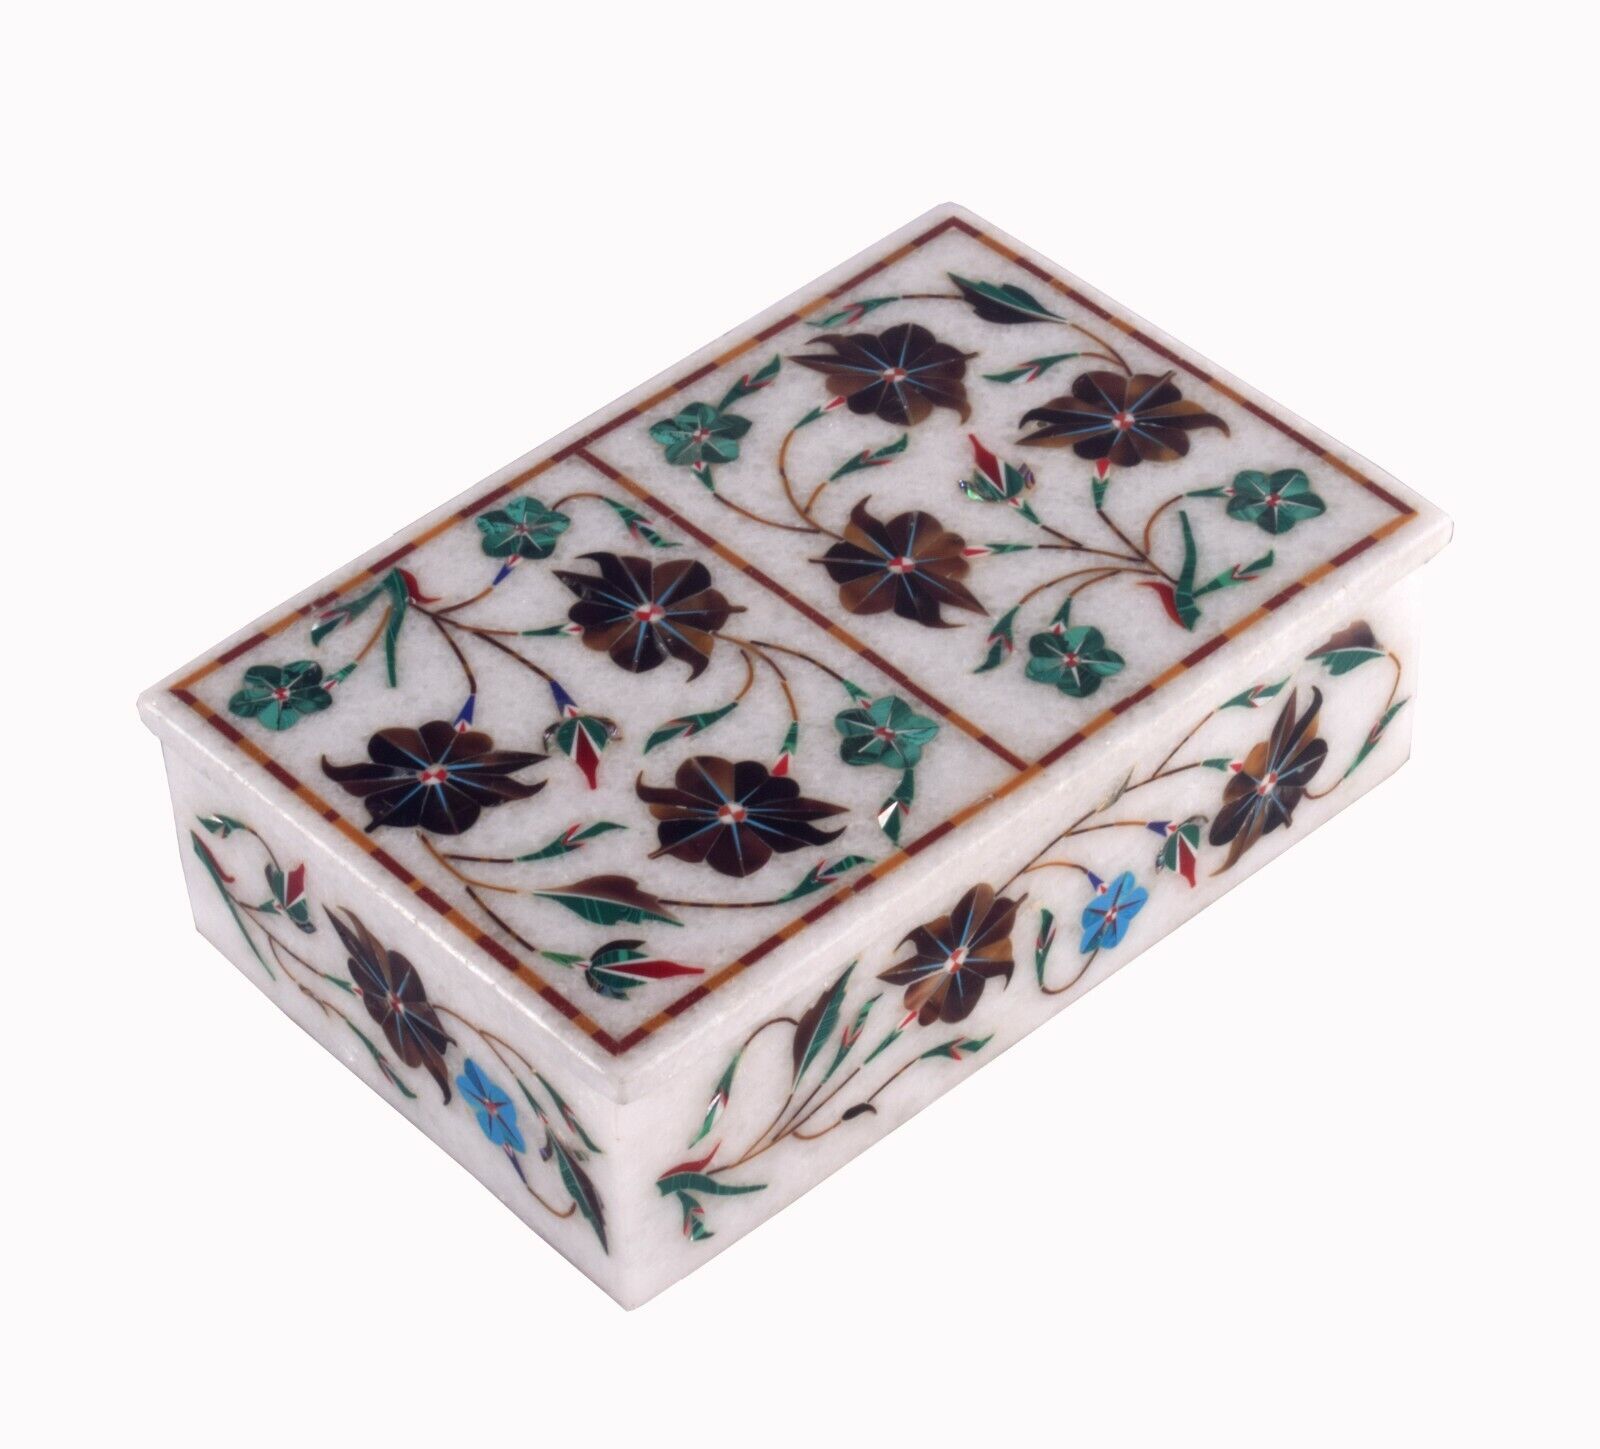 Marble Jewelry Box Inlay Gems Floral Art Marquetry Valentine Gift Home Decor